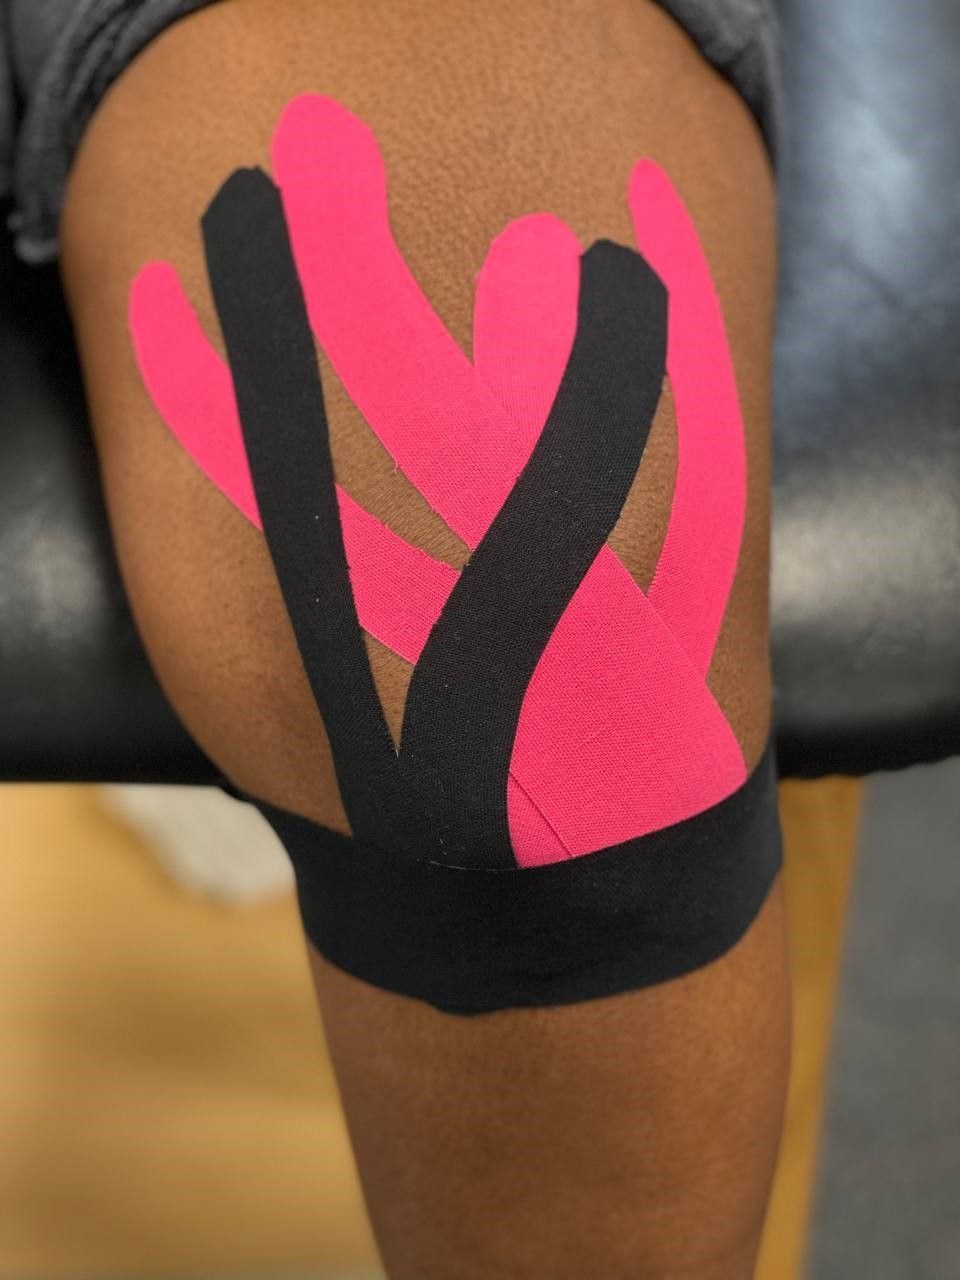 Back in the Game patient enjoying the benefits of kinesiology tape, they are wearing hot pink and black tapes